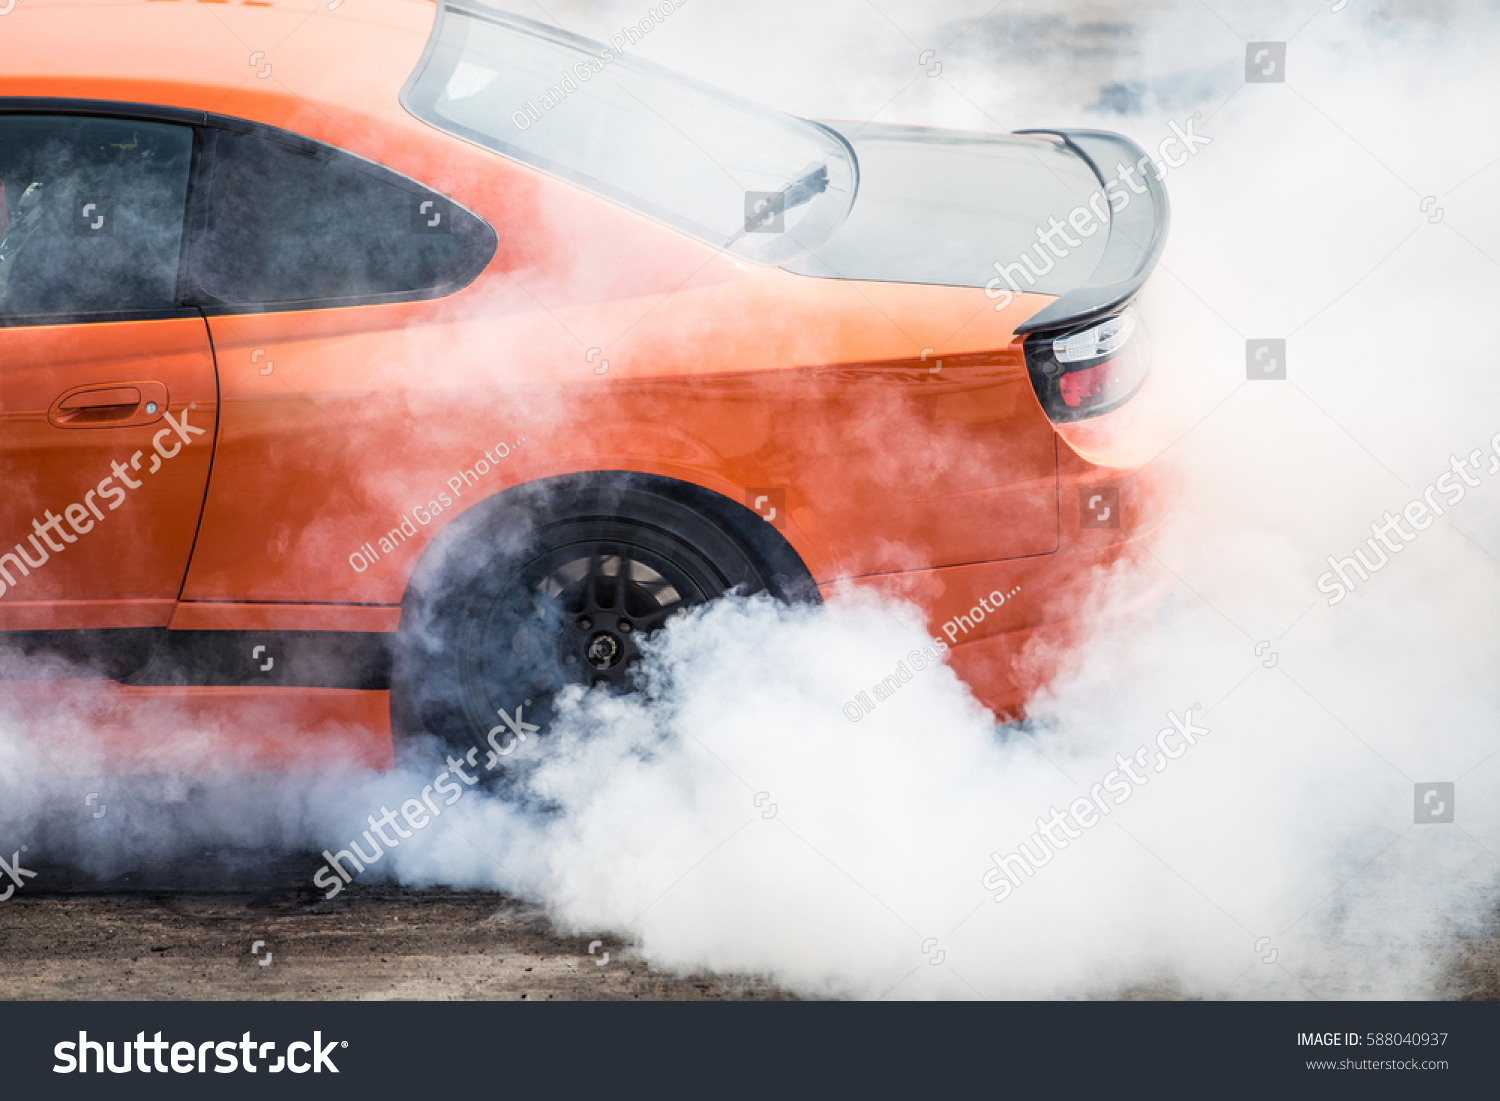 Rear wheel drive super sport car burning tire for warm up before competition to increase type temperature for good traction and grip. #588040937